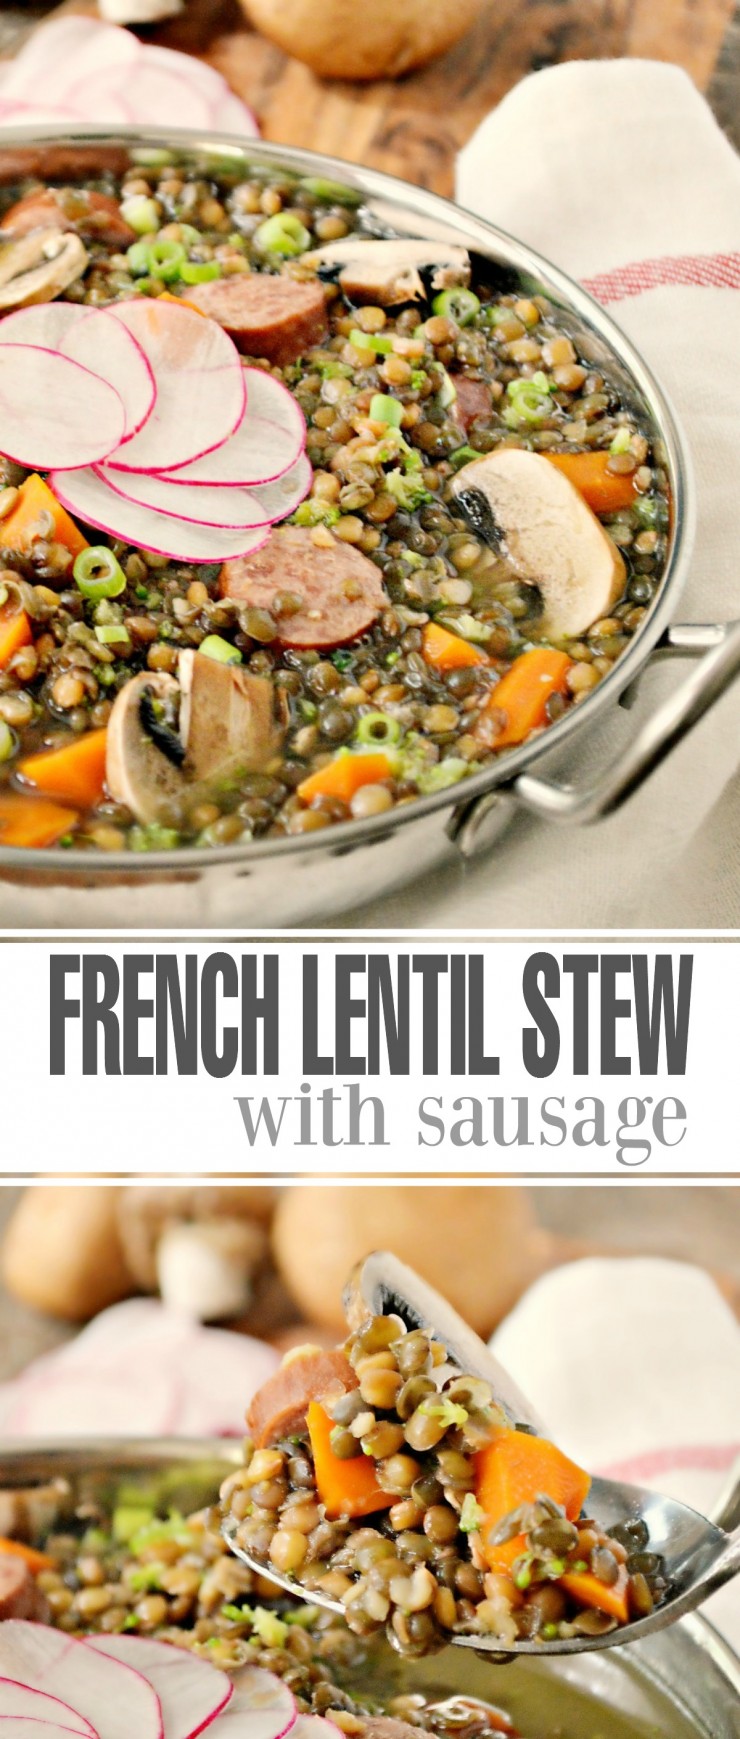 This French Lentil Stew with Sausage is a quick, easy and filling family dinner recipe.